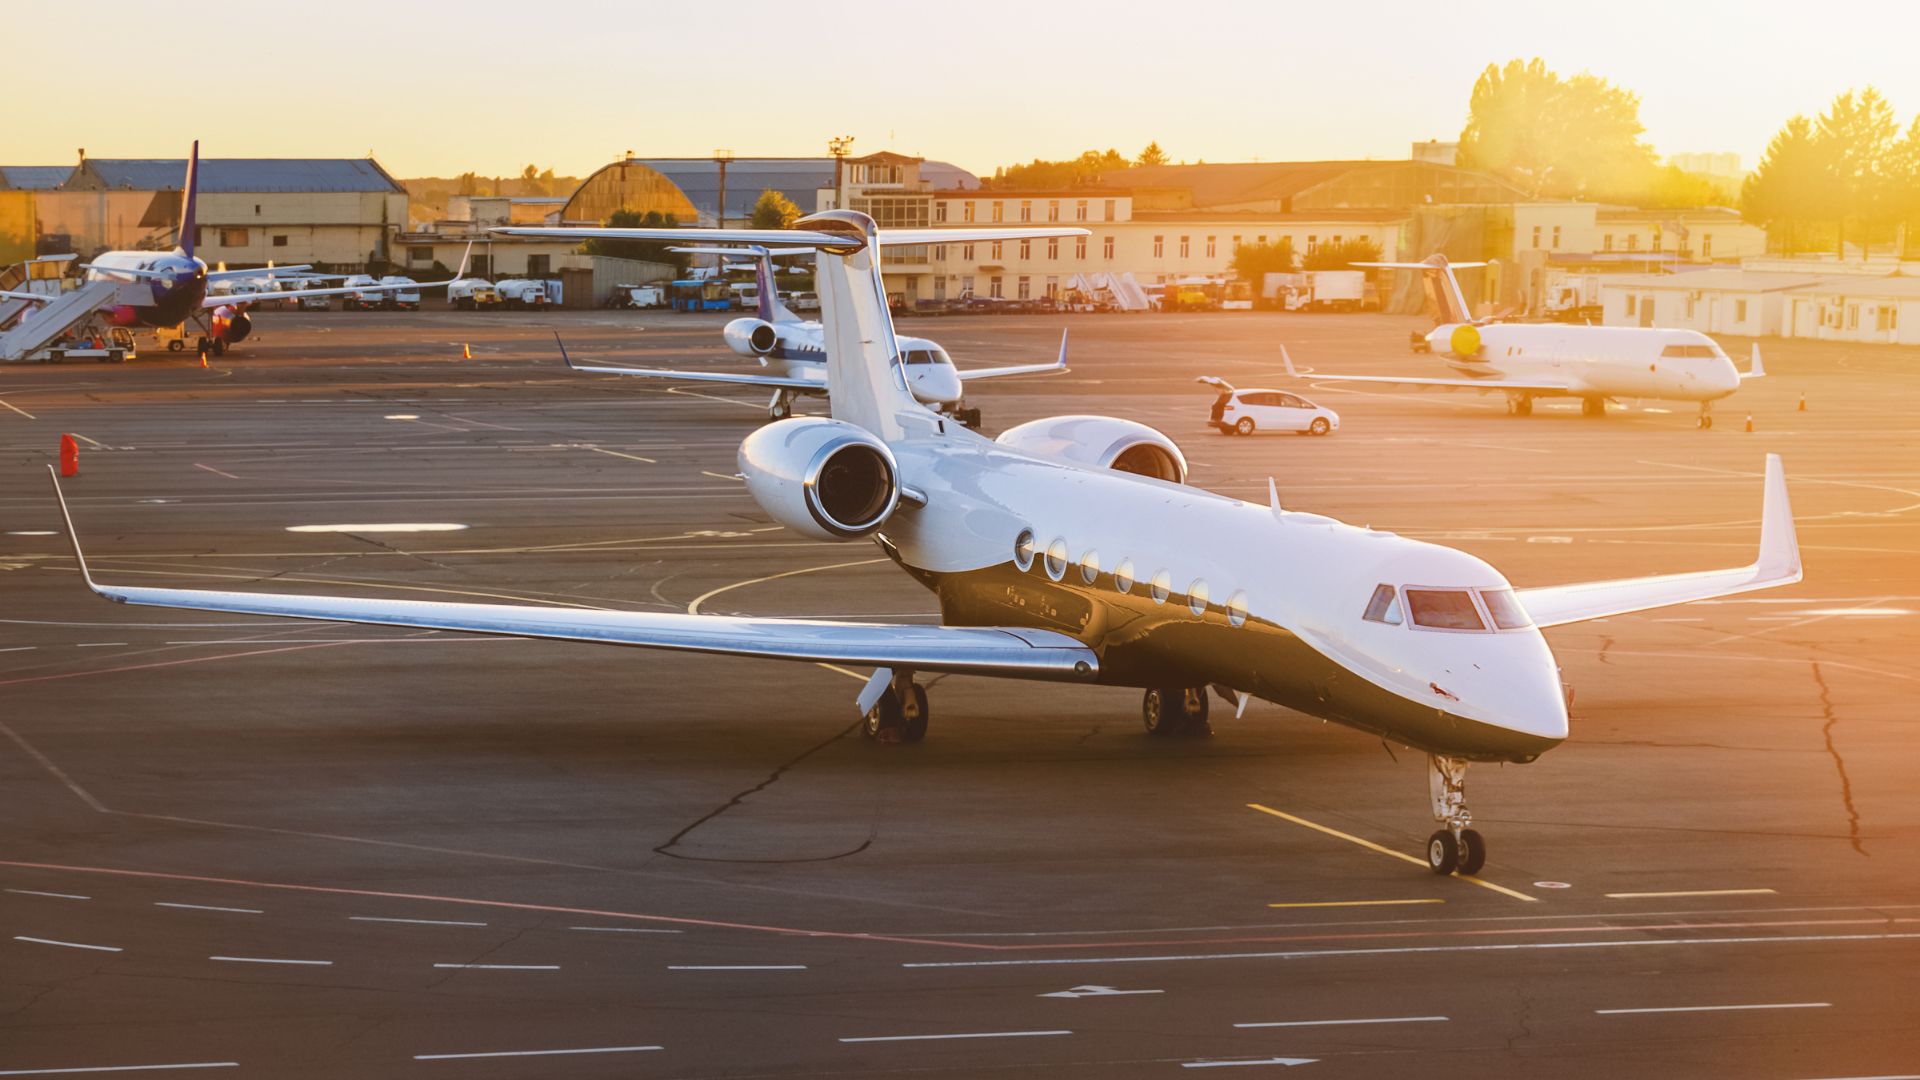 Top 10 Popular Airports for Private Jets